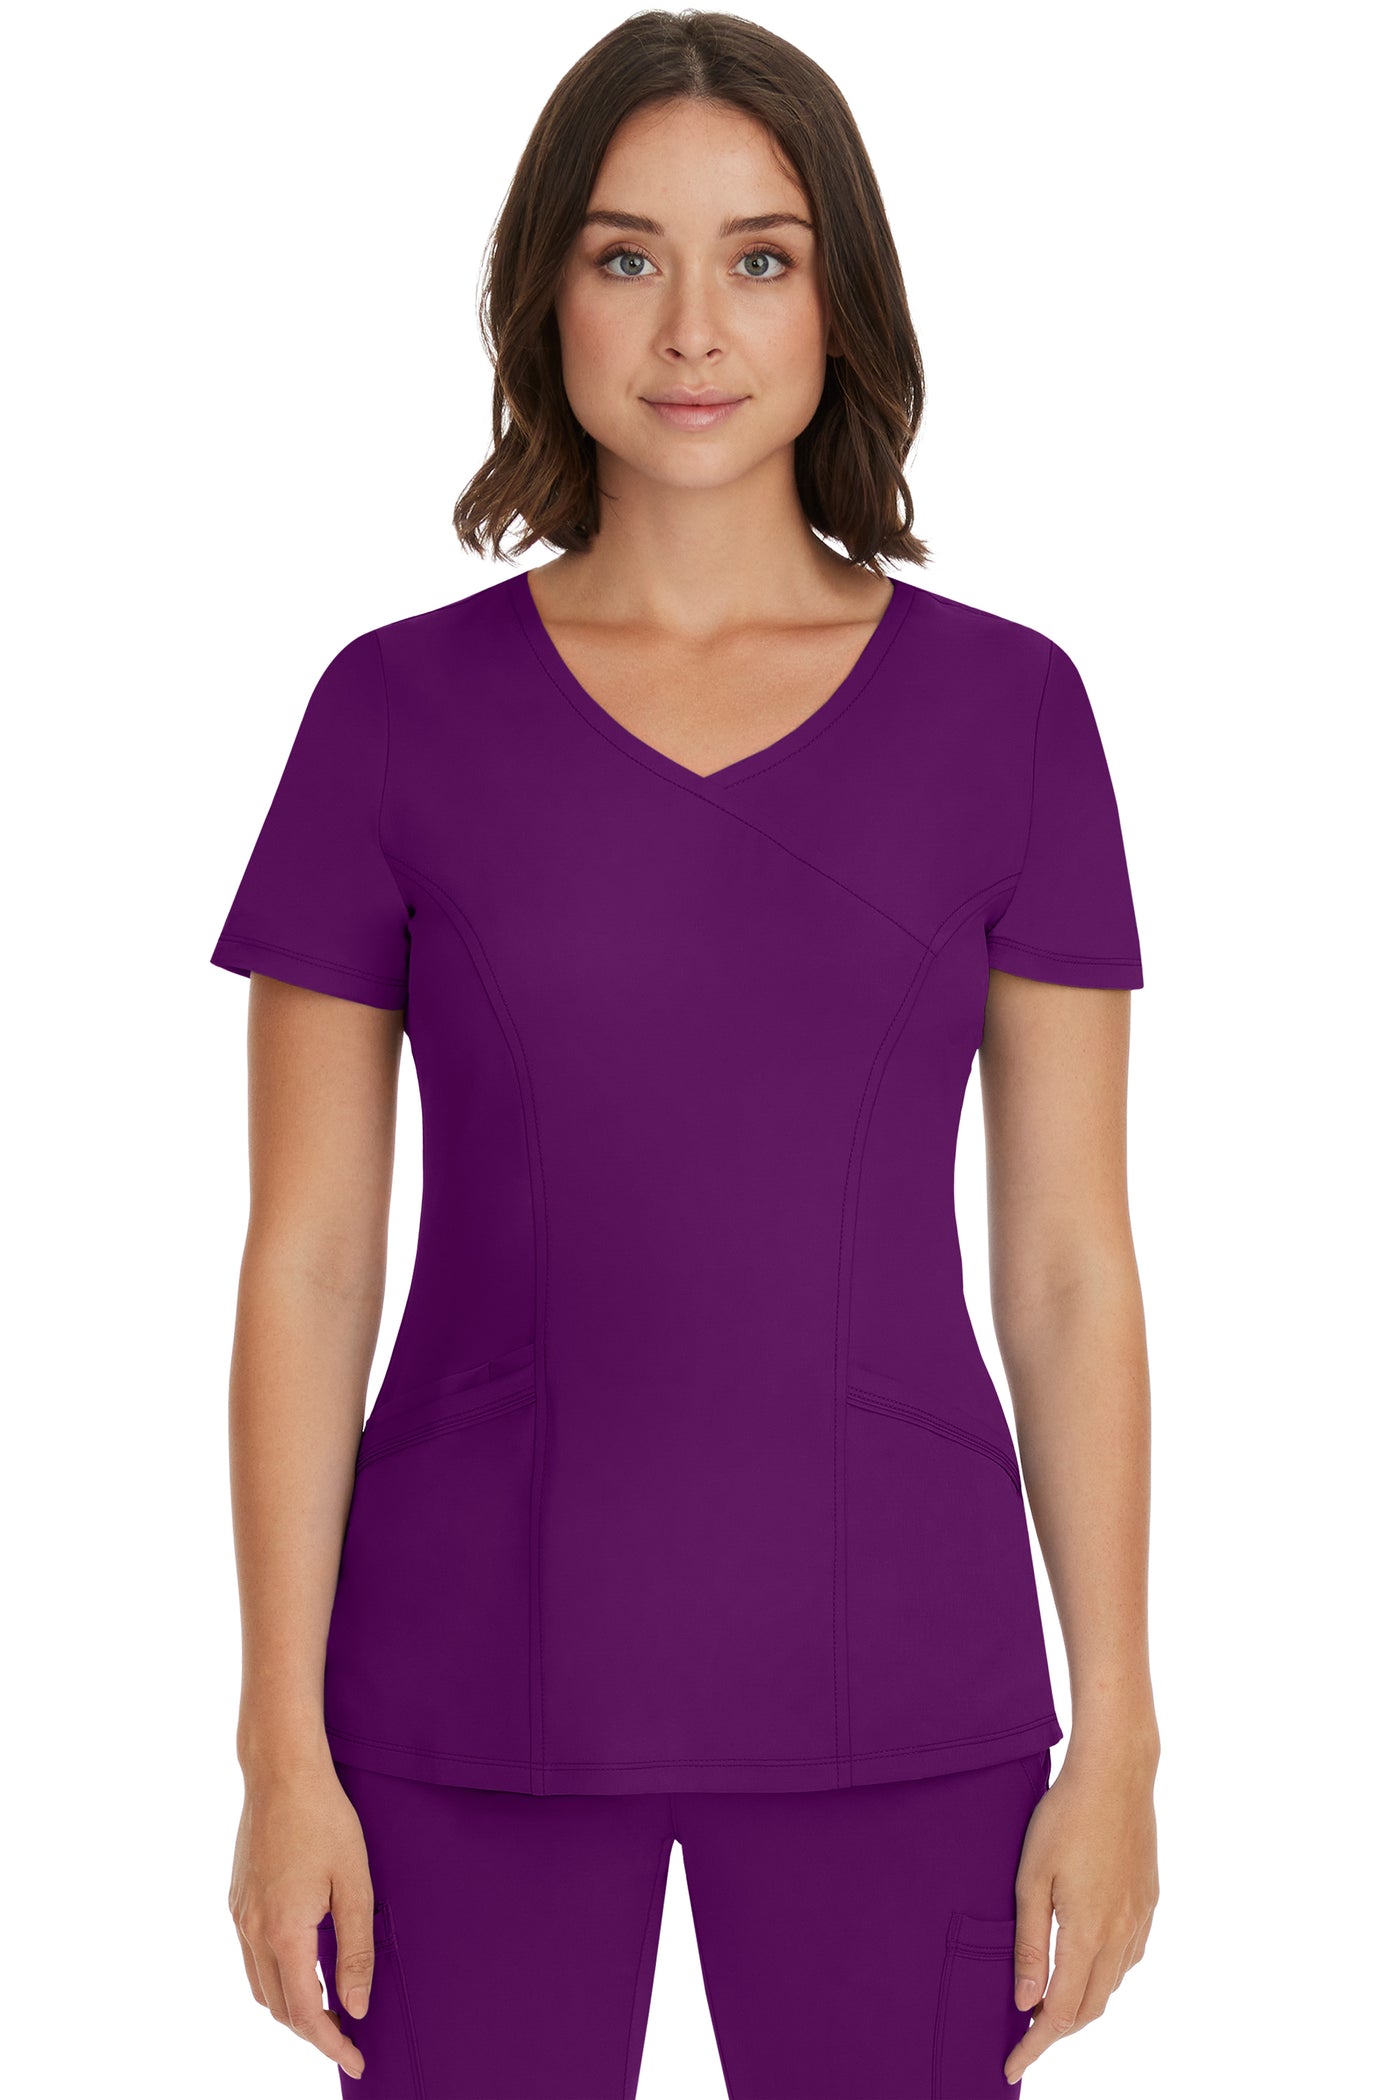 MADISON TOP by Healing Hands XXS-5XL/ EGGPLANT